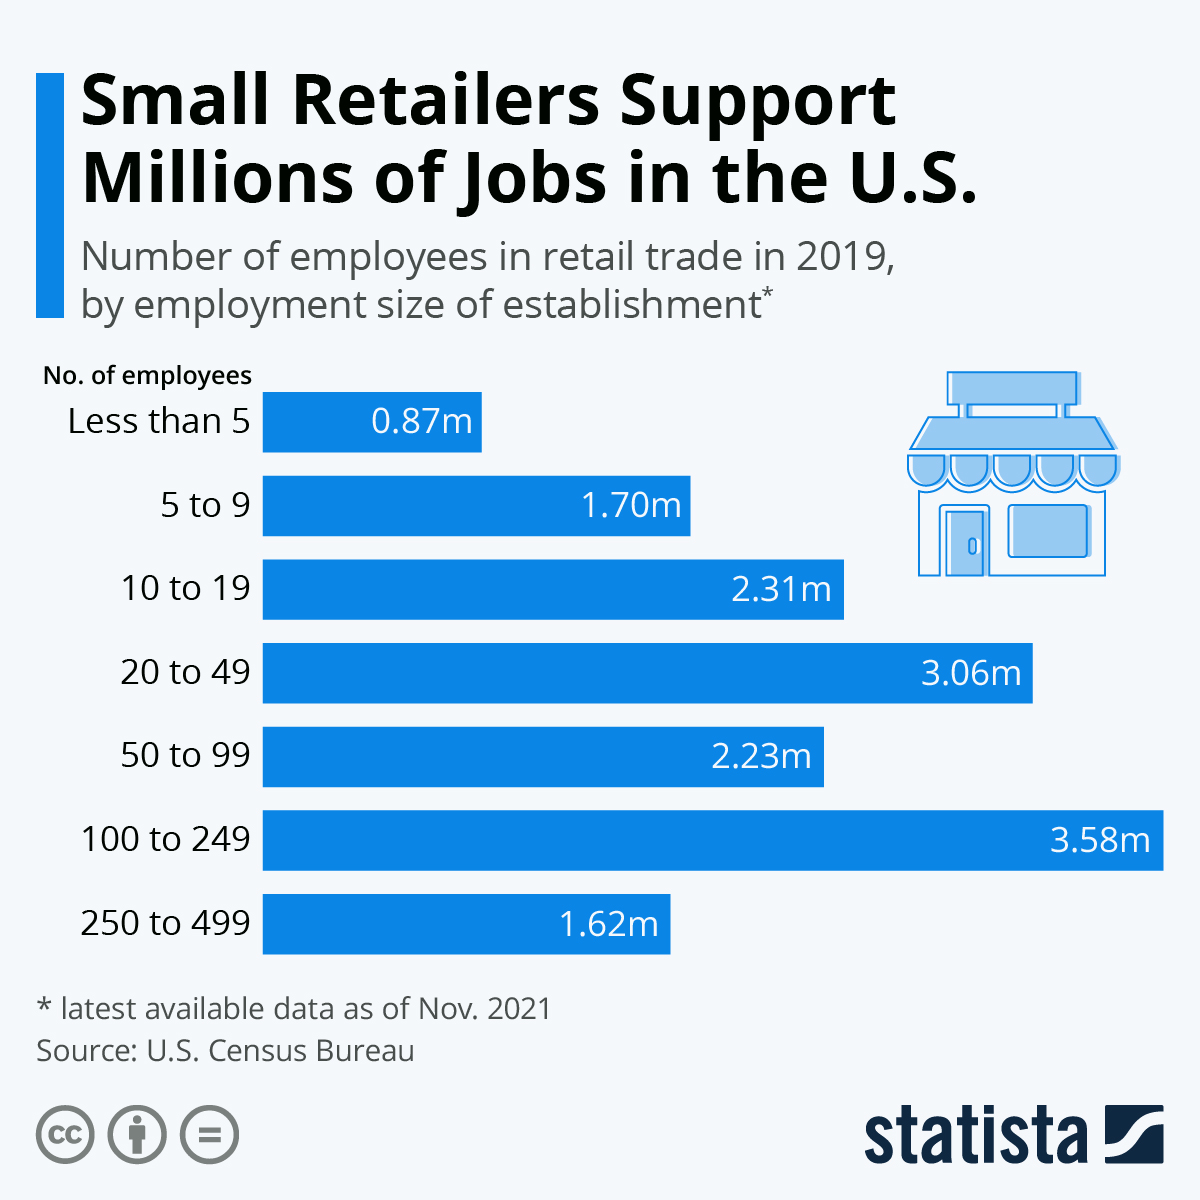 Small Retailers Support Millions of Jobs in the U.S.
